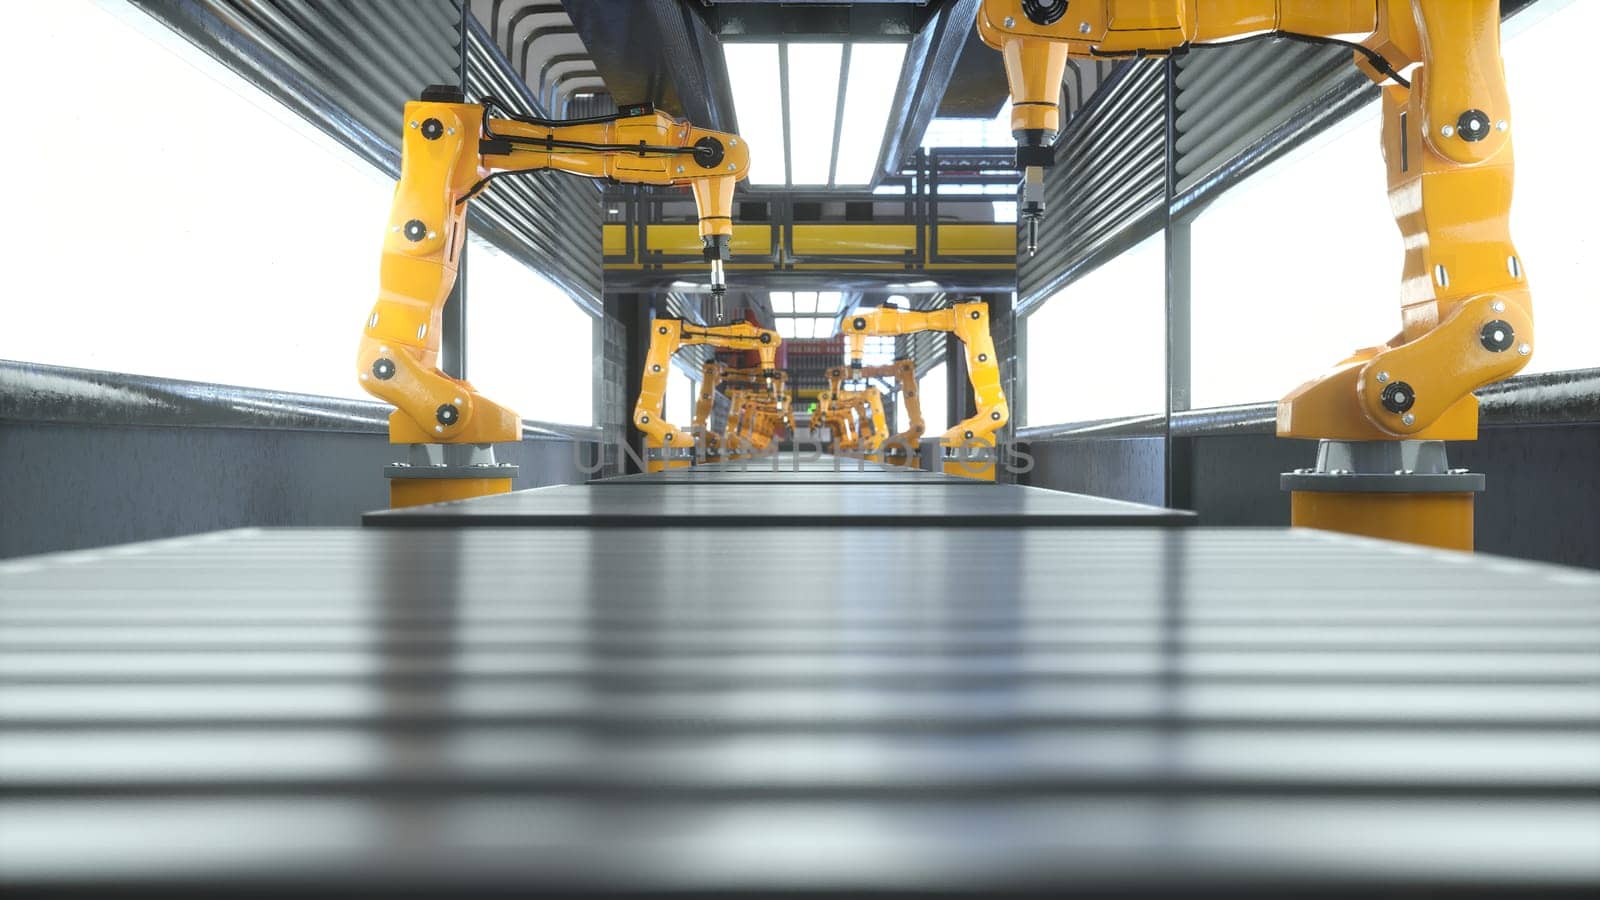 Automated factory with robotic arms used for placing manufactured products on conveyor belts, 3D rendering. Assembly lines and heavy machinery in high tech logistics depot